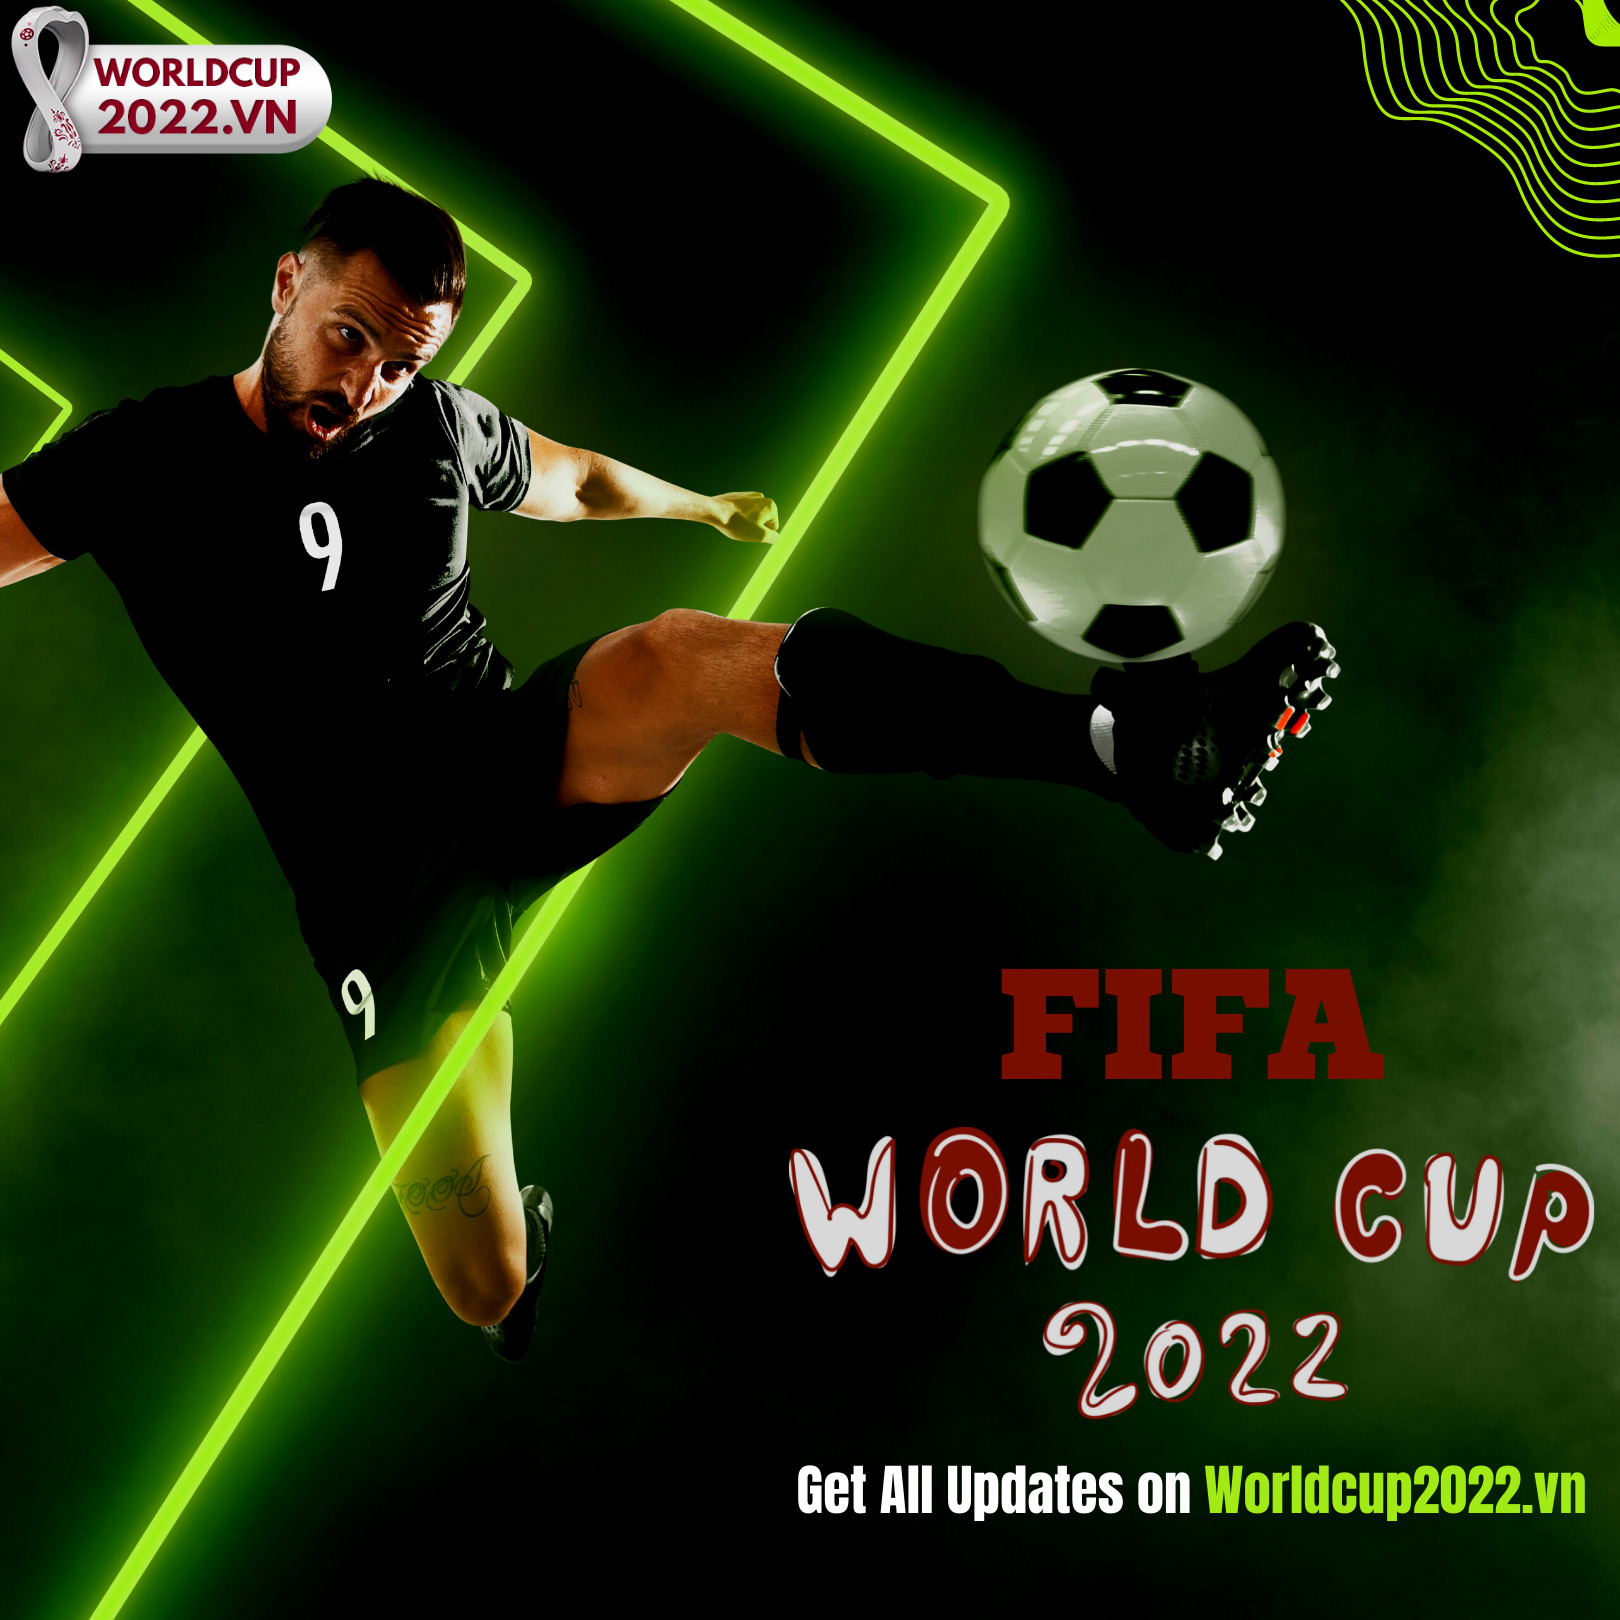 WORLDCUP2022.VN Features News and Updates on the Upcoming FIFA World Cup 2022 9